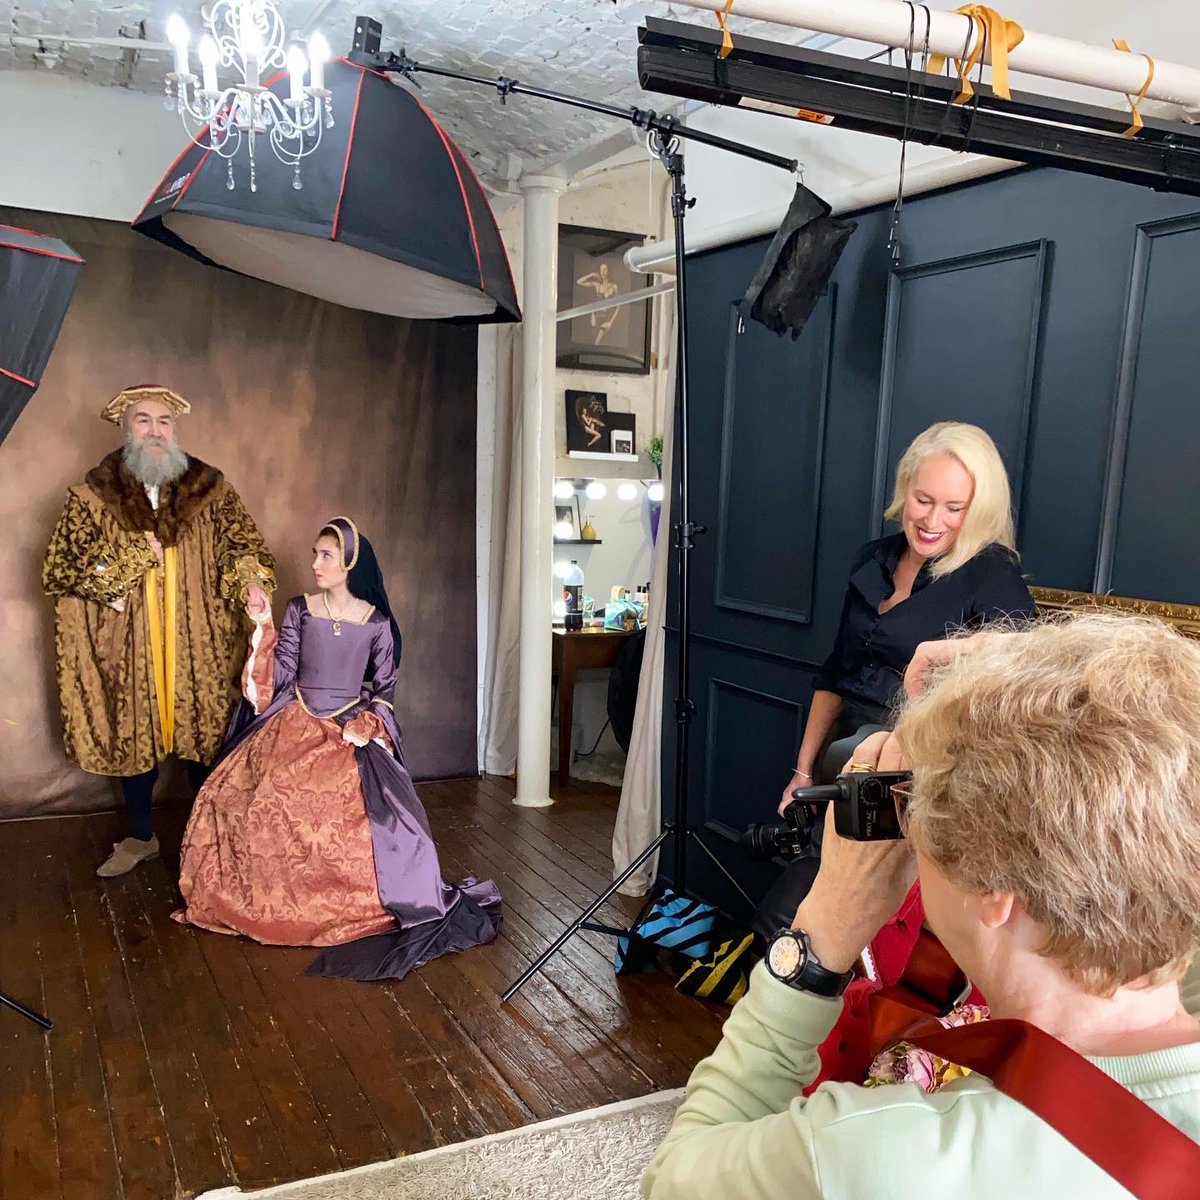 Sneak peek behind Photography Session Days  during one of their fantastic courses! 🙌
For more information & how to book, head to sessiondays.co.uk 

💕Big thankyou to organisers Graham Currey & Emma Finch for letting us peek behind the scenes!